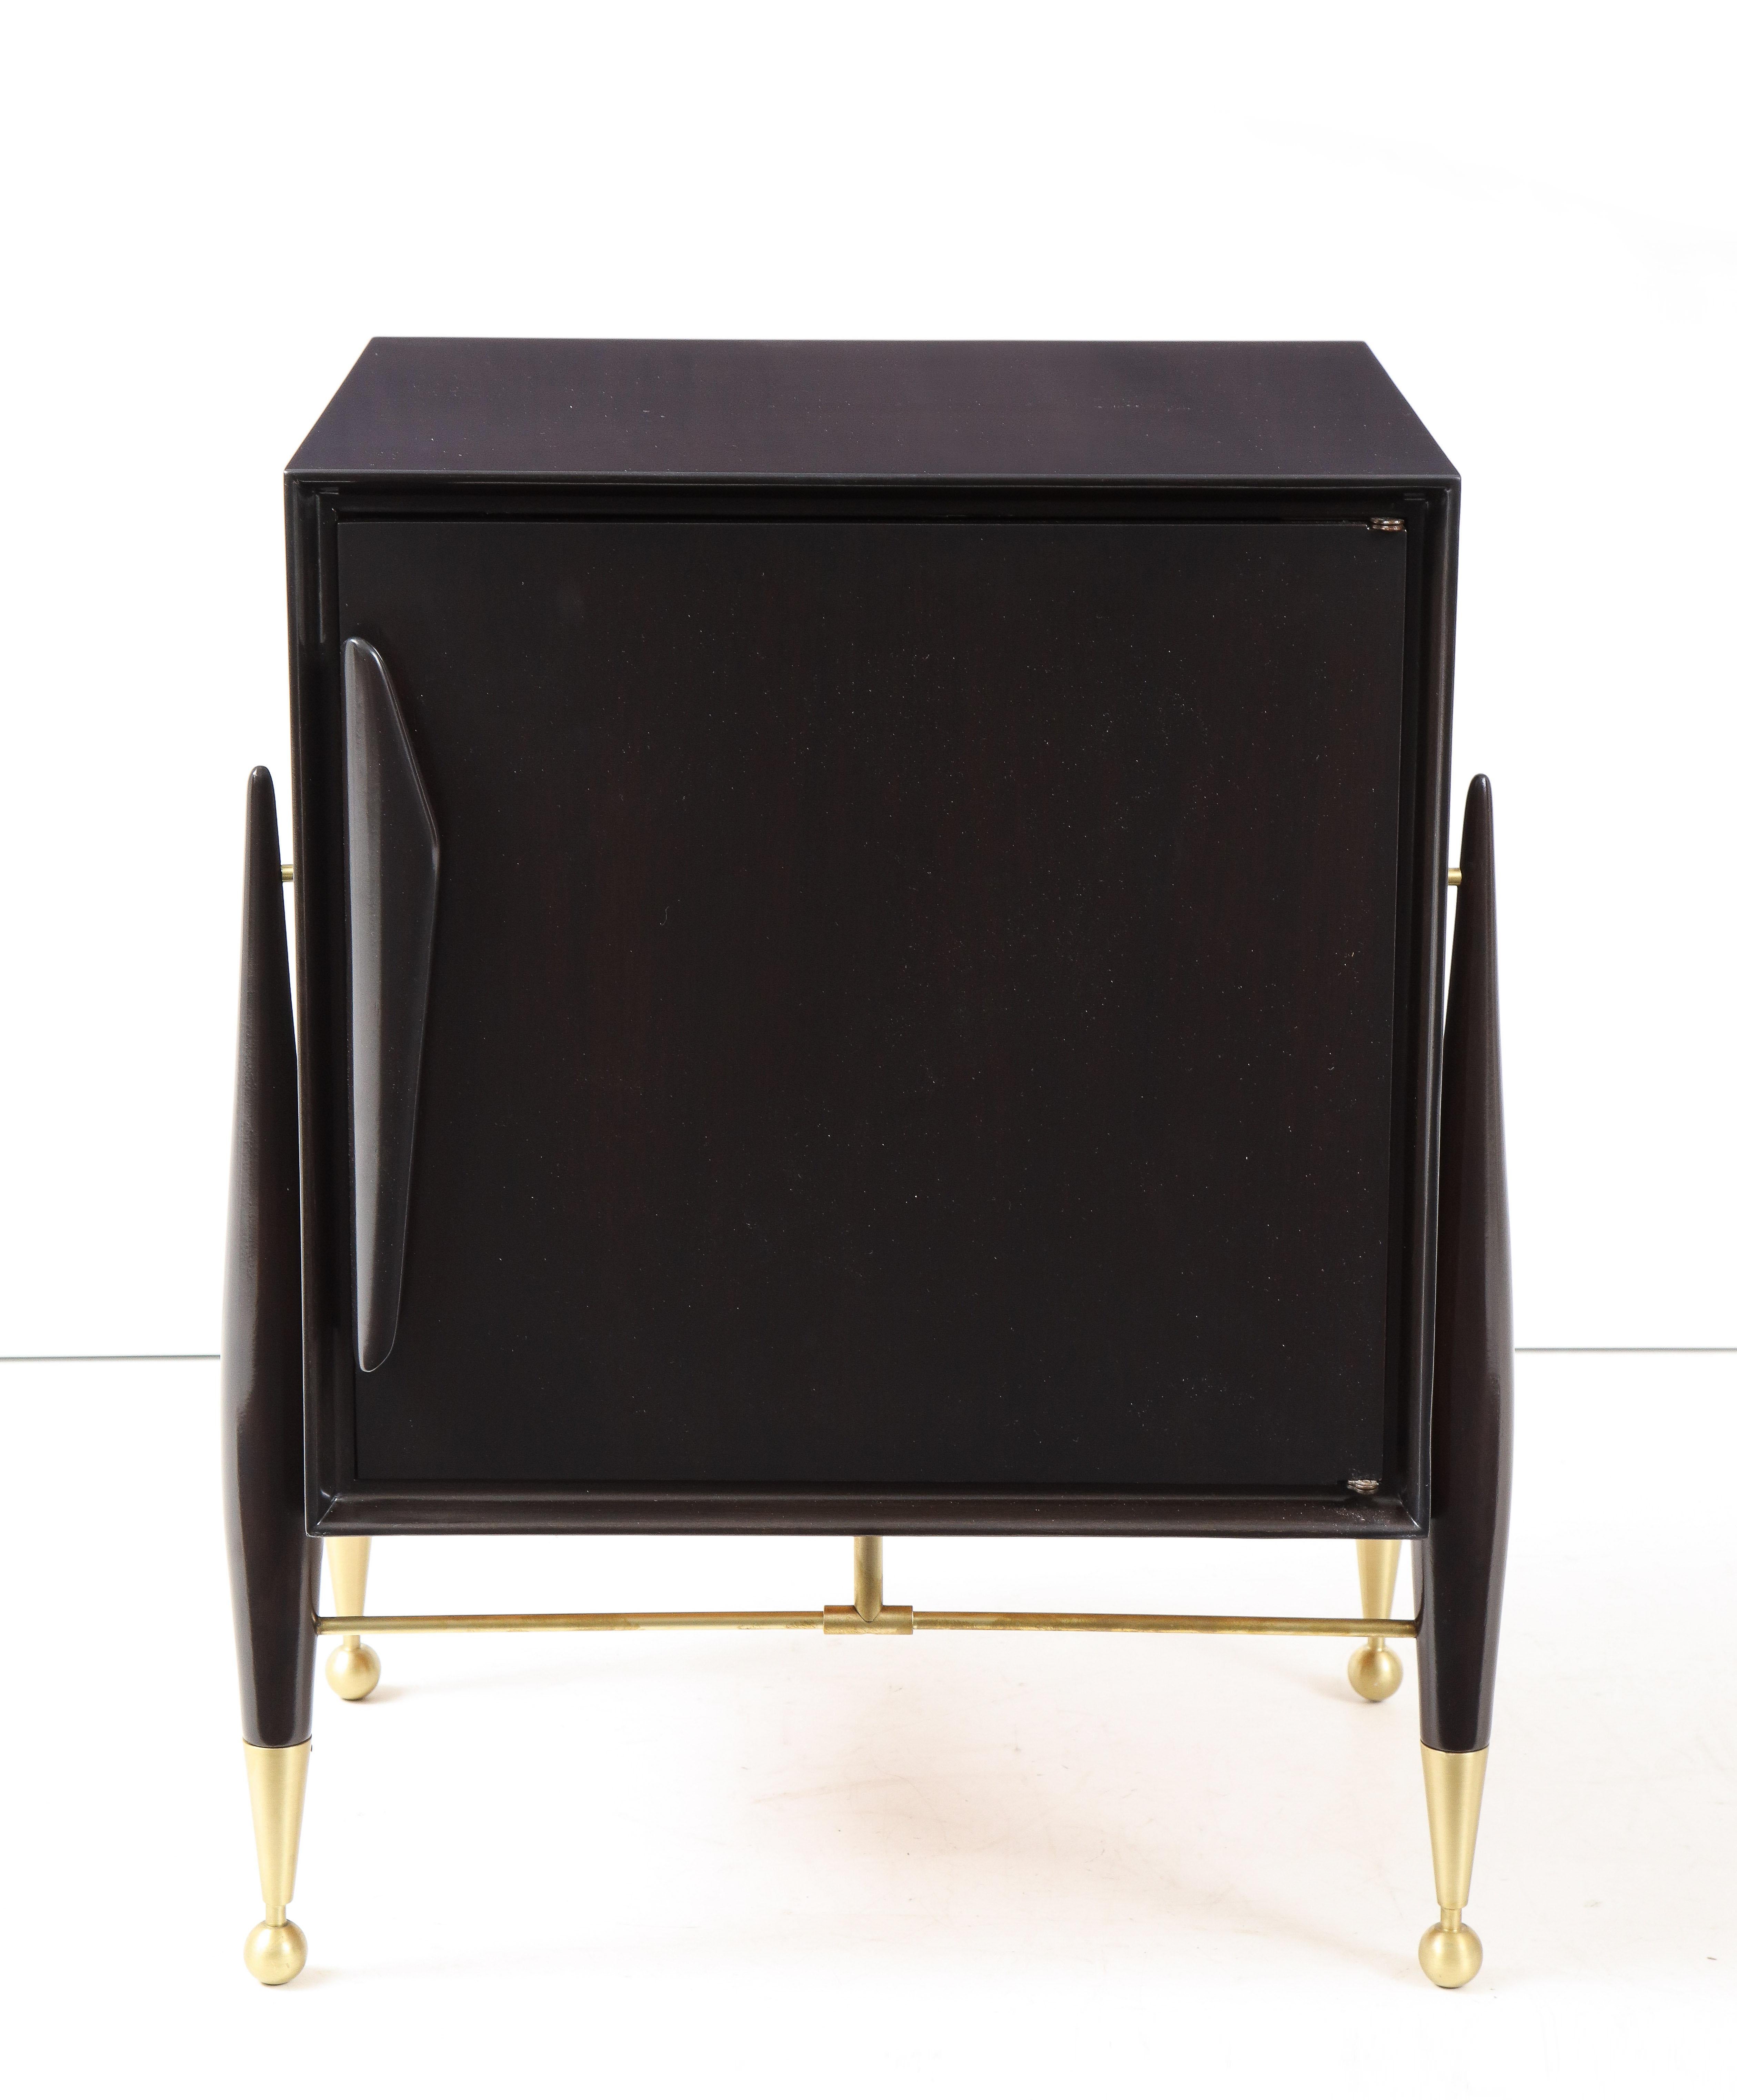 Pair of mint restored walnut nightstands in a deep brown satin finish stain and featuring brushed brass sabots and stretchers. Each houses a glass shelf.